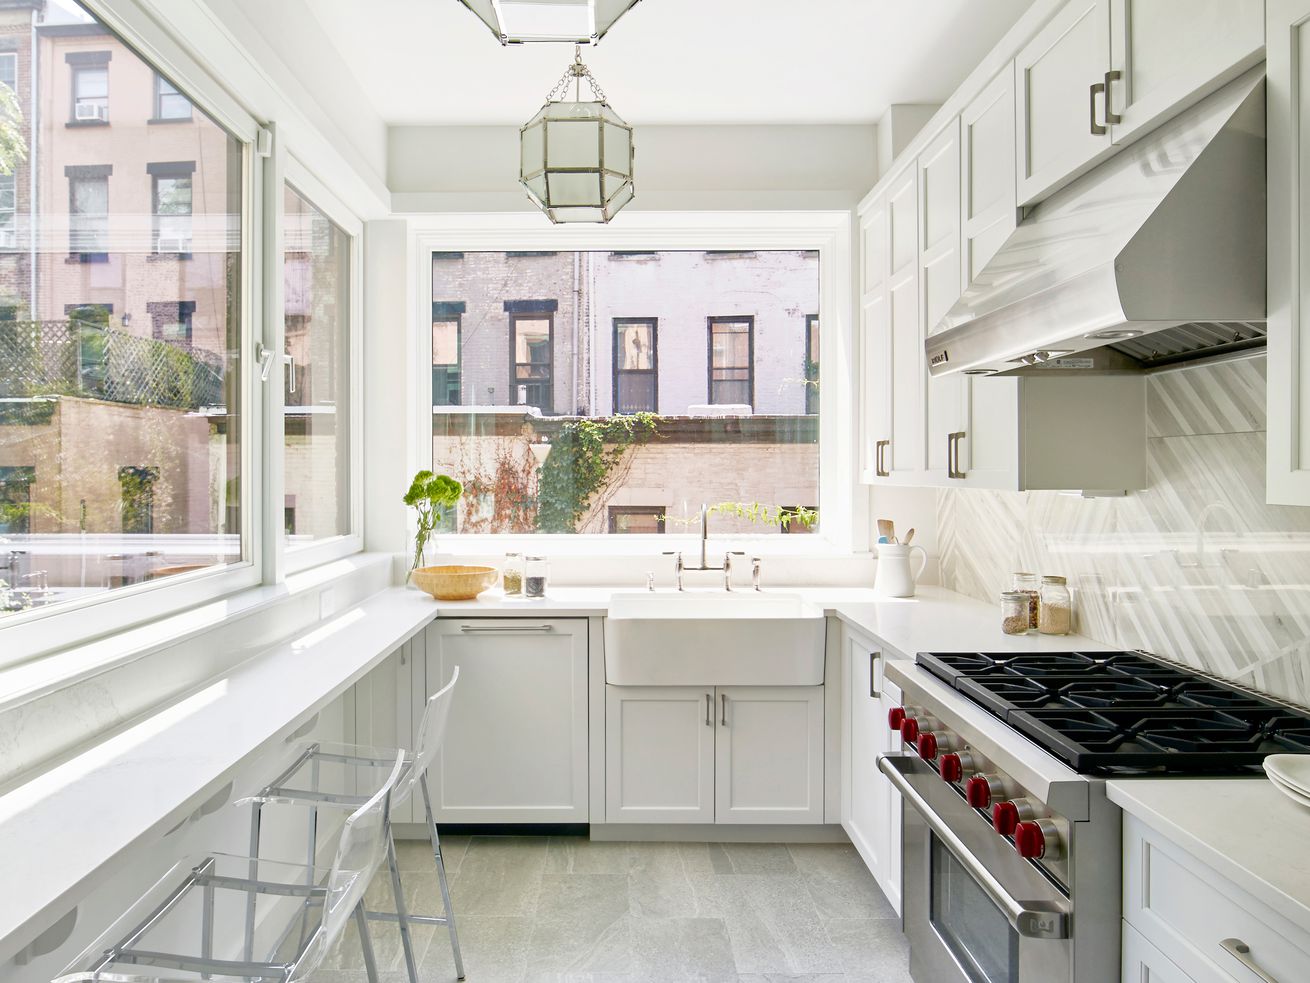 A white galley kitchen with large windows on two sides, as well as pendant lights down the length of the room.